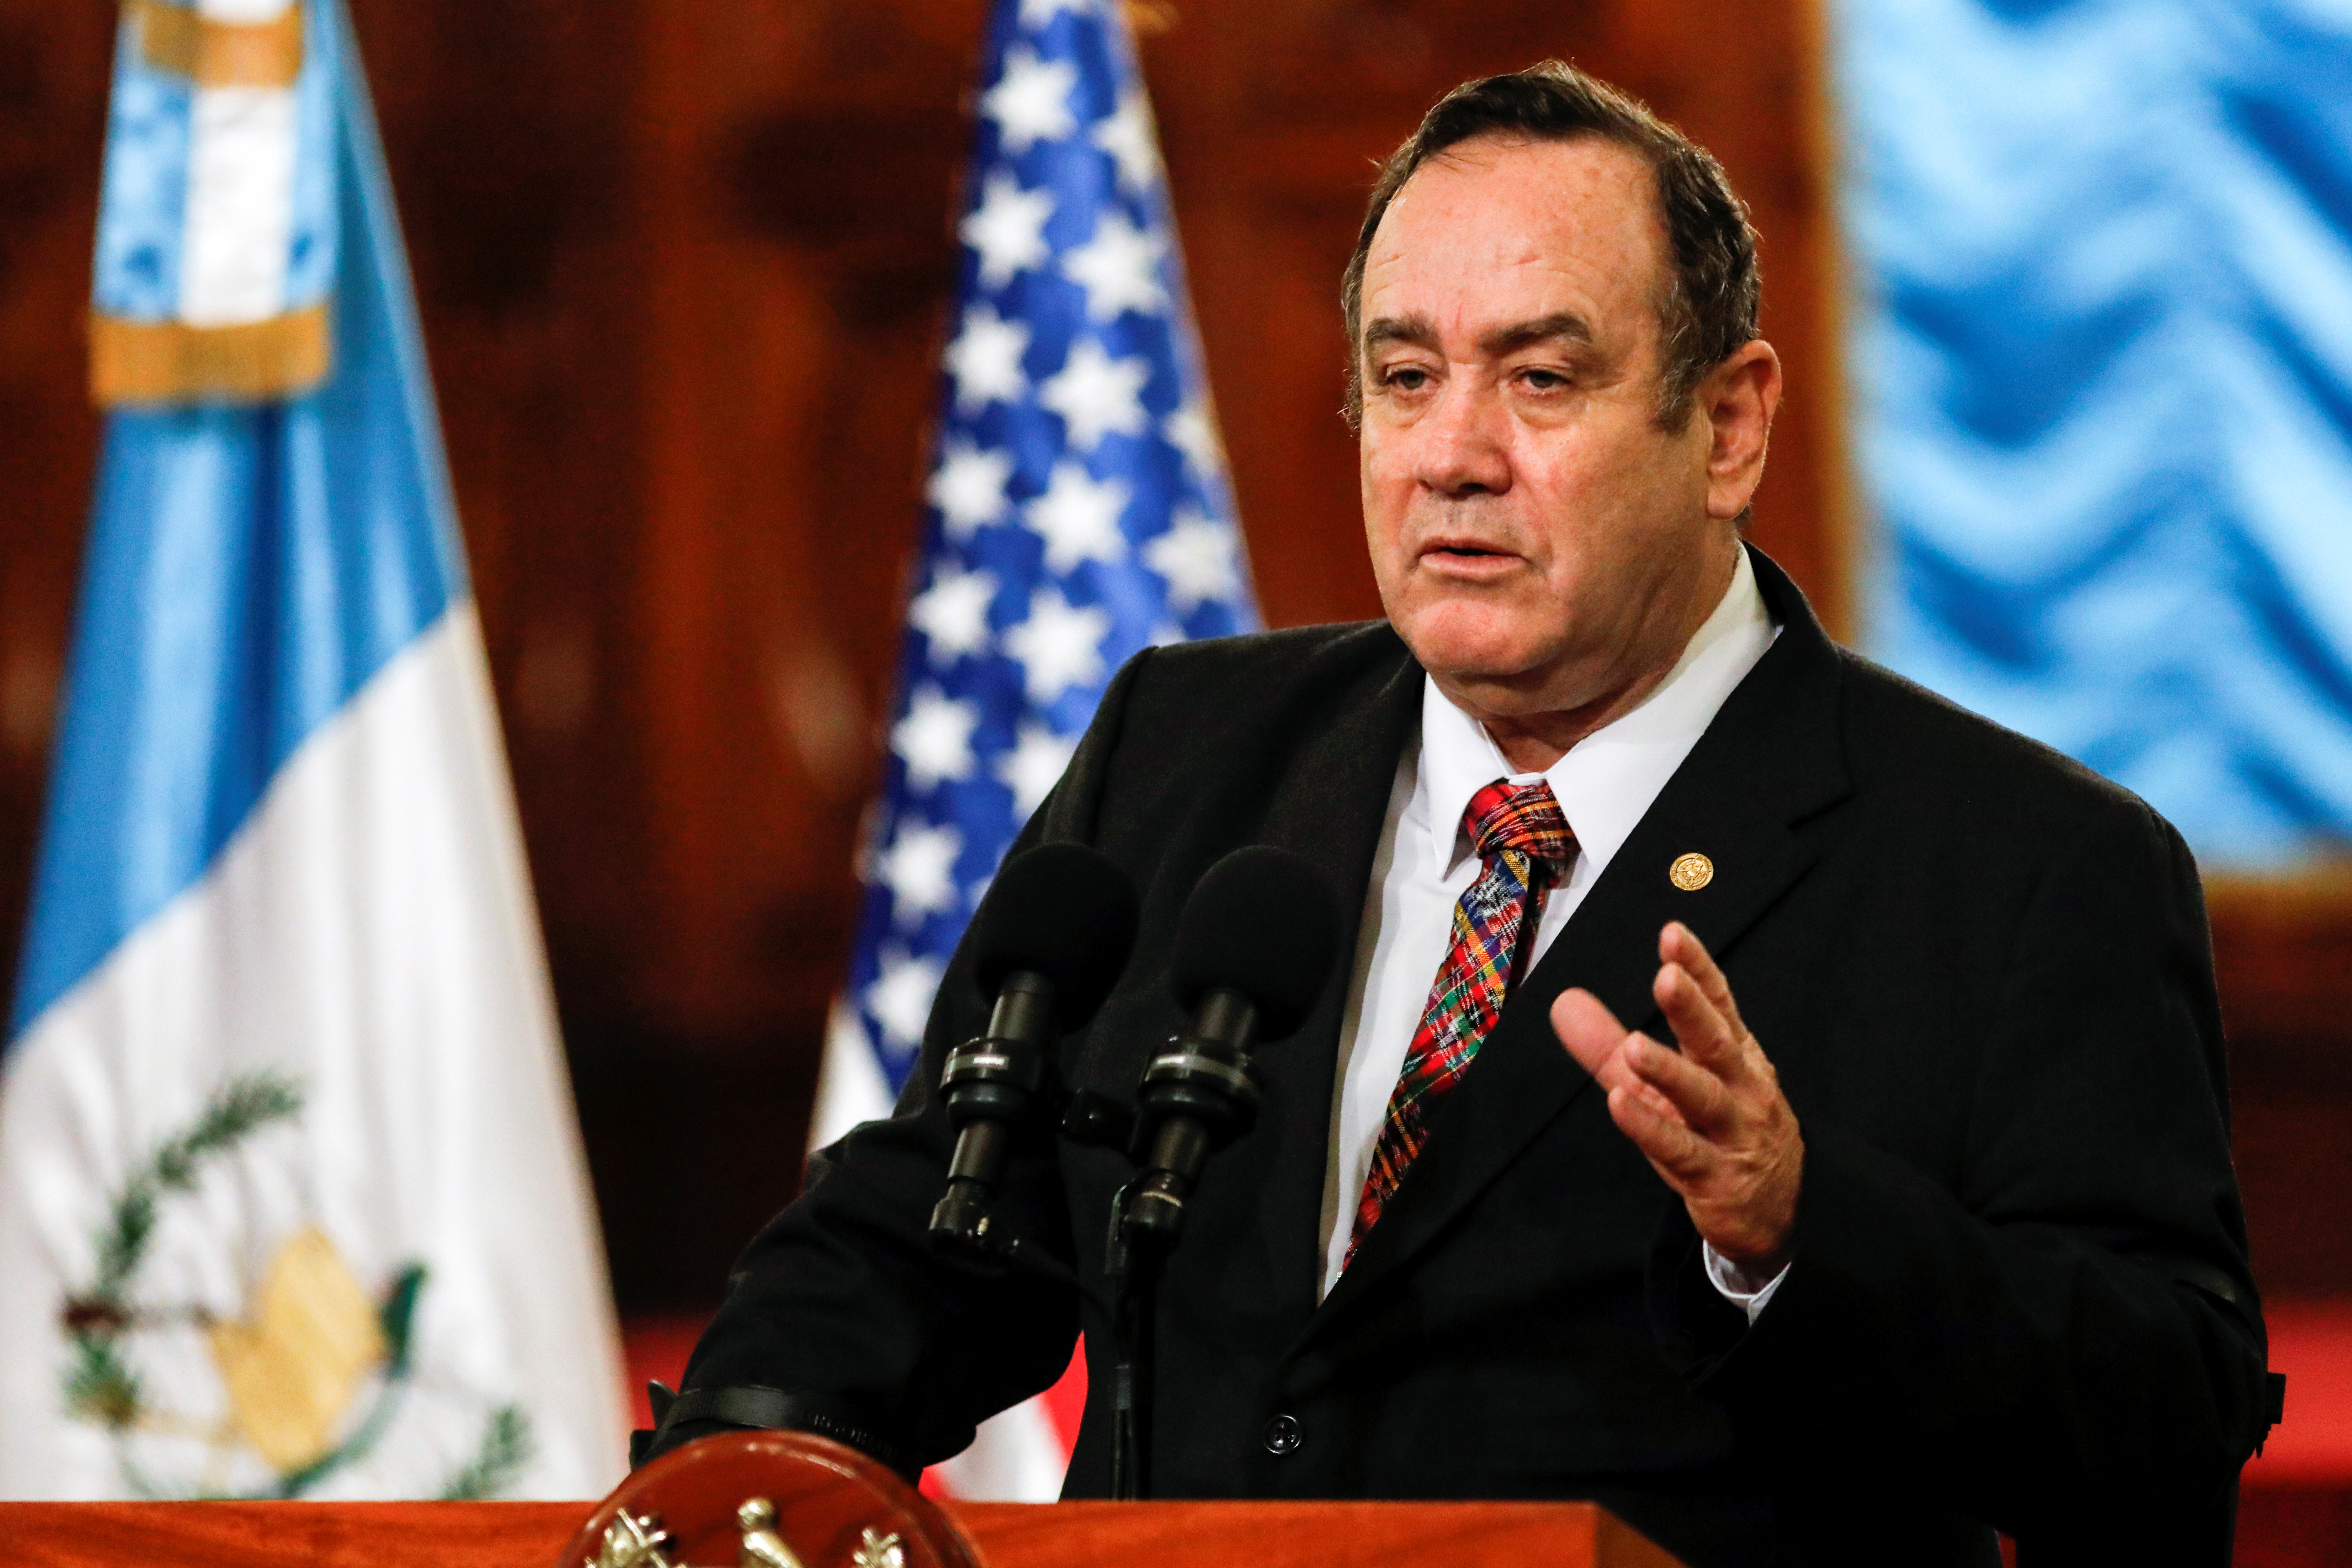 Guatemala's President Alejandro Giammattei speaks during a news conference in Guatemala City